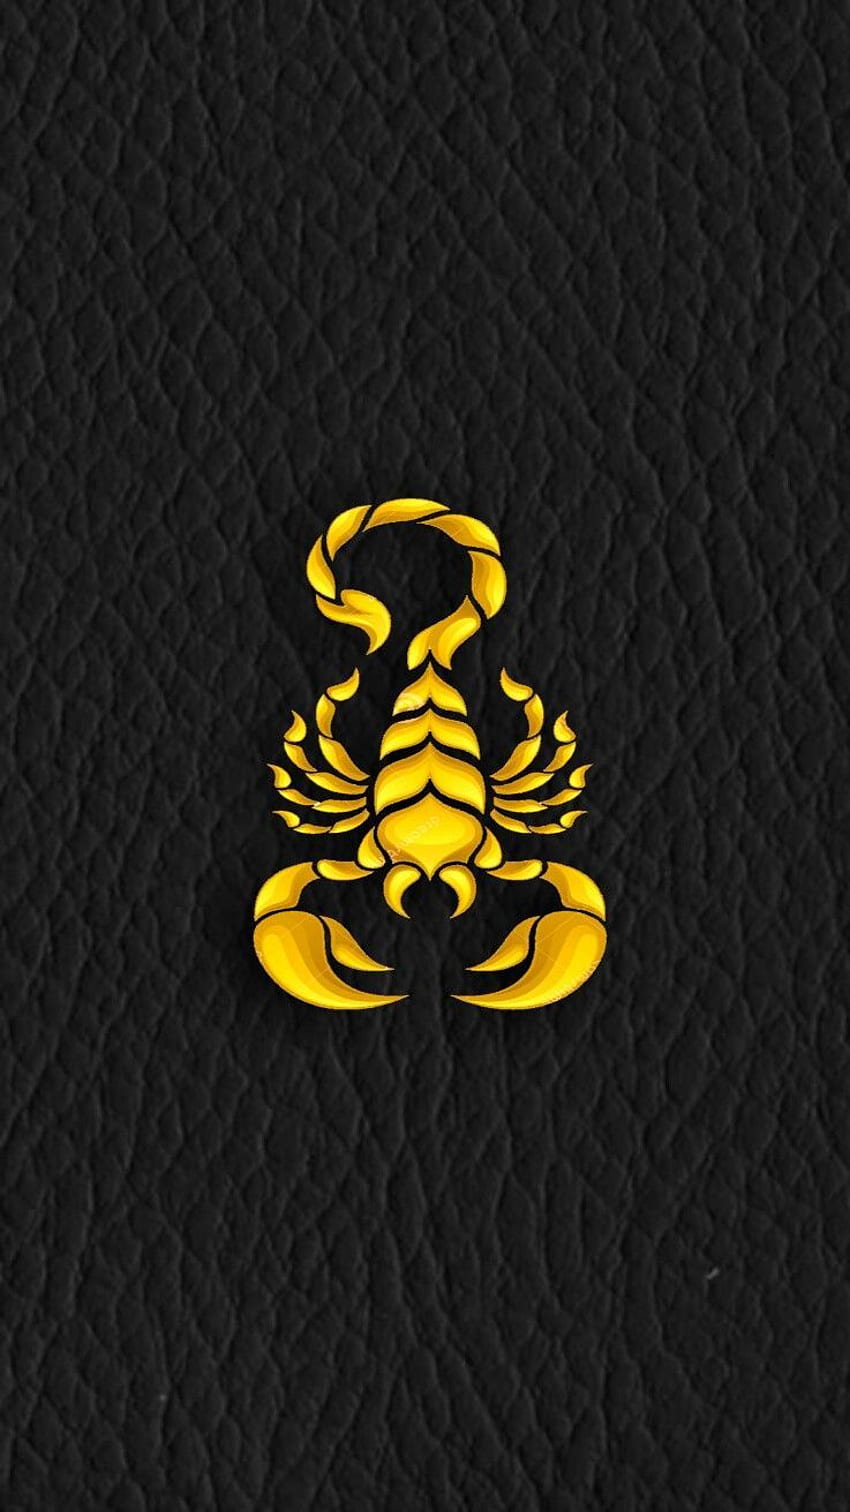 Scorpion Images and Stock Photos. 11,521 Scorpion photography and royalty  free pictures available to download from thousands of stock photo providers.